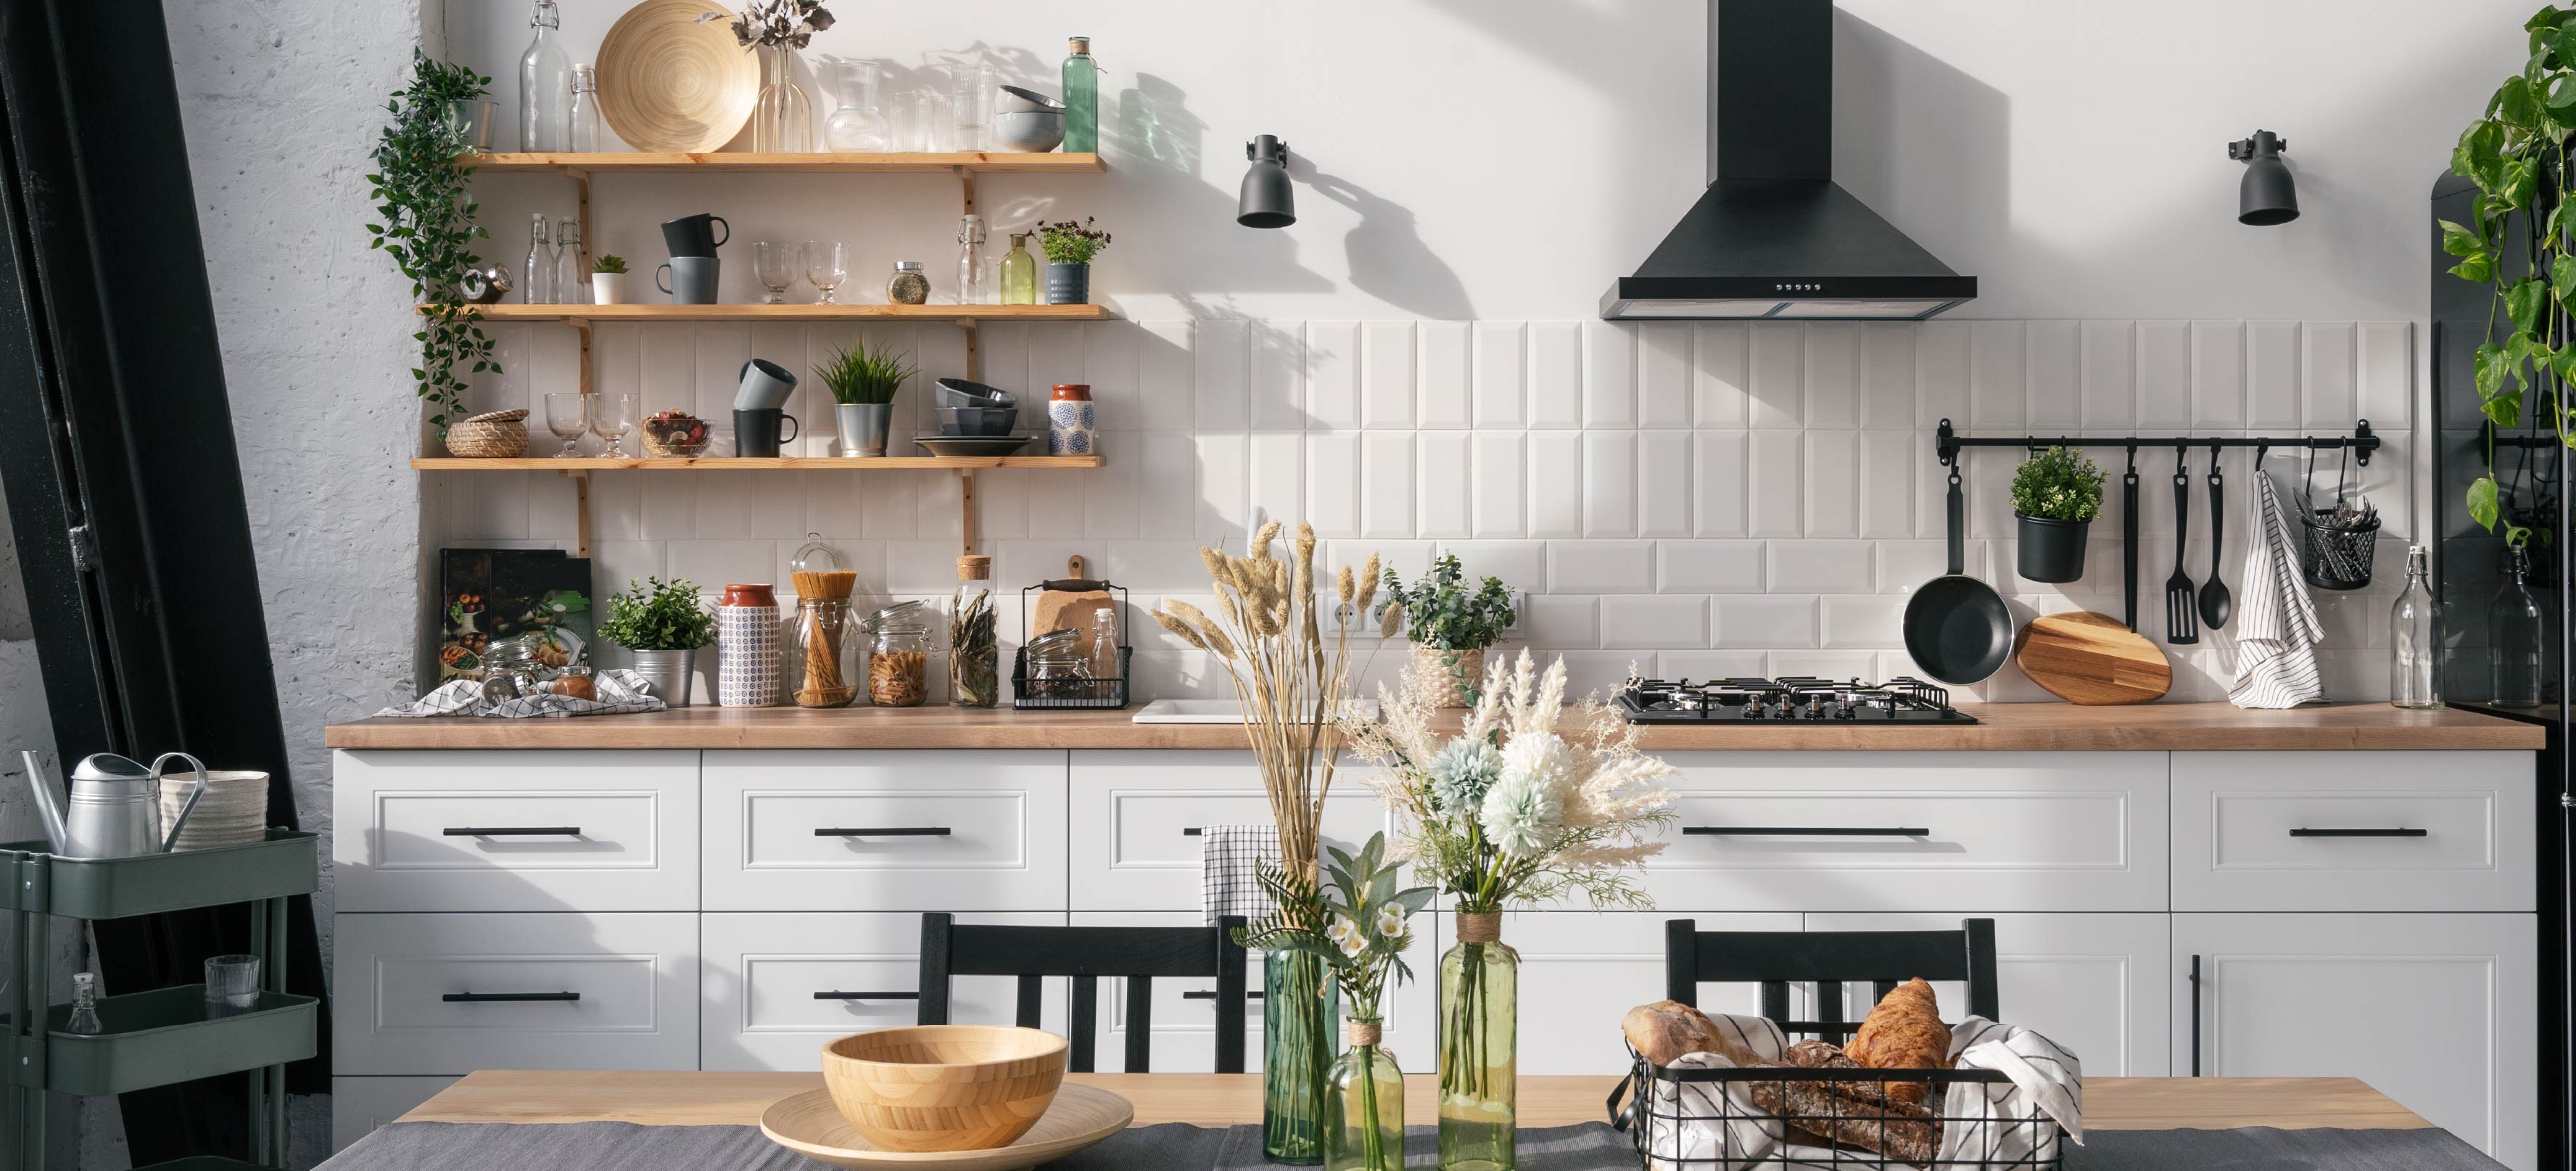 Top 10 Tips to optimize your kitchen space for more efficiency